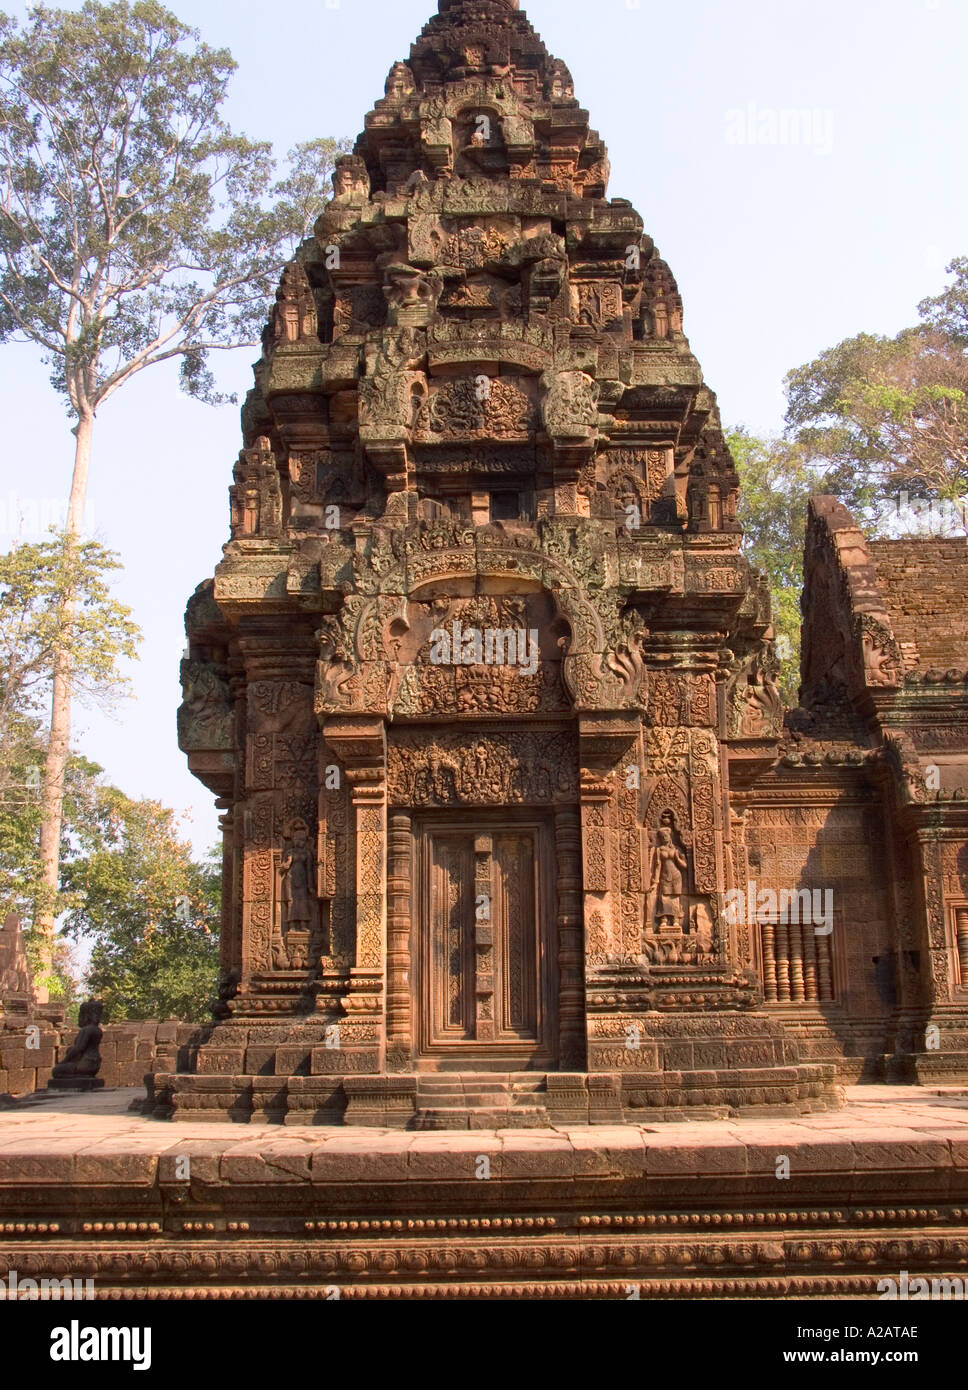 Cambodia Siem Reap Culture Heritage Angkor Temples Banteay Srei Hindu Temple dedicated to Shiva AD967 Central citadel Stock Photo